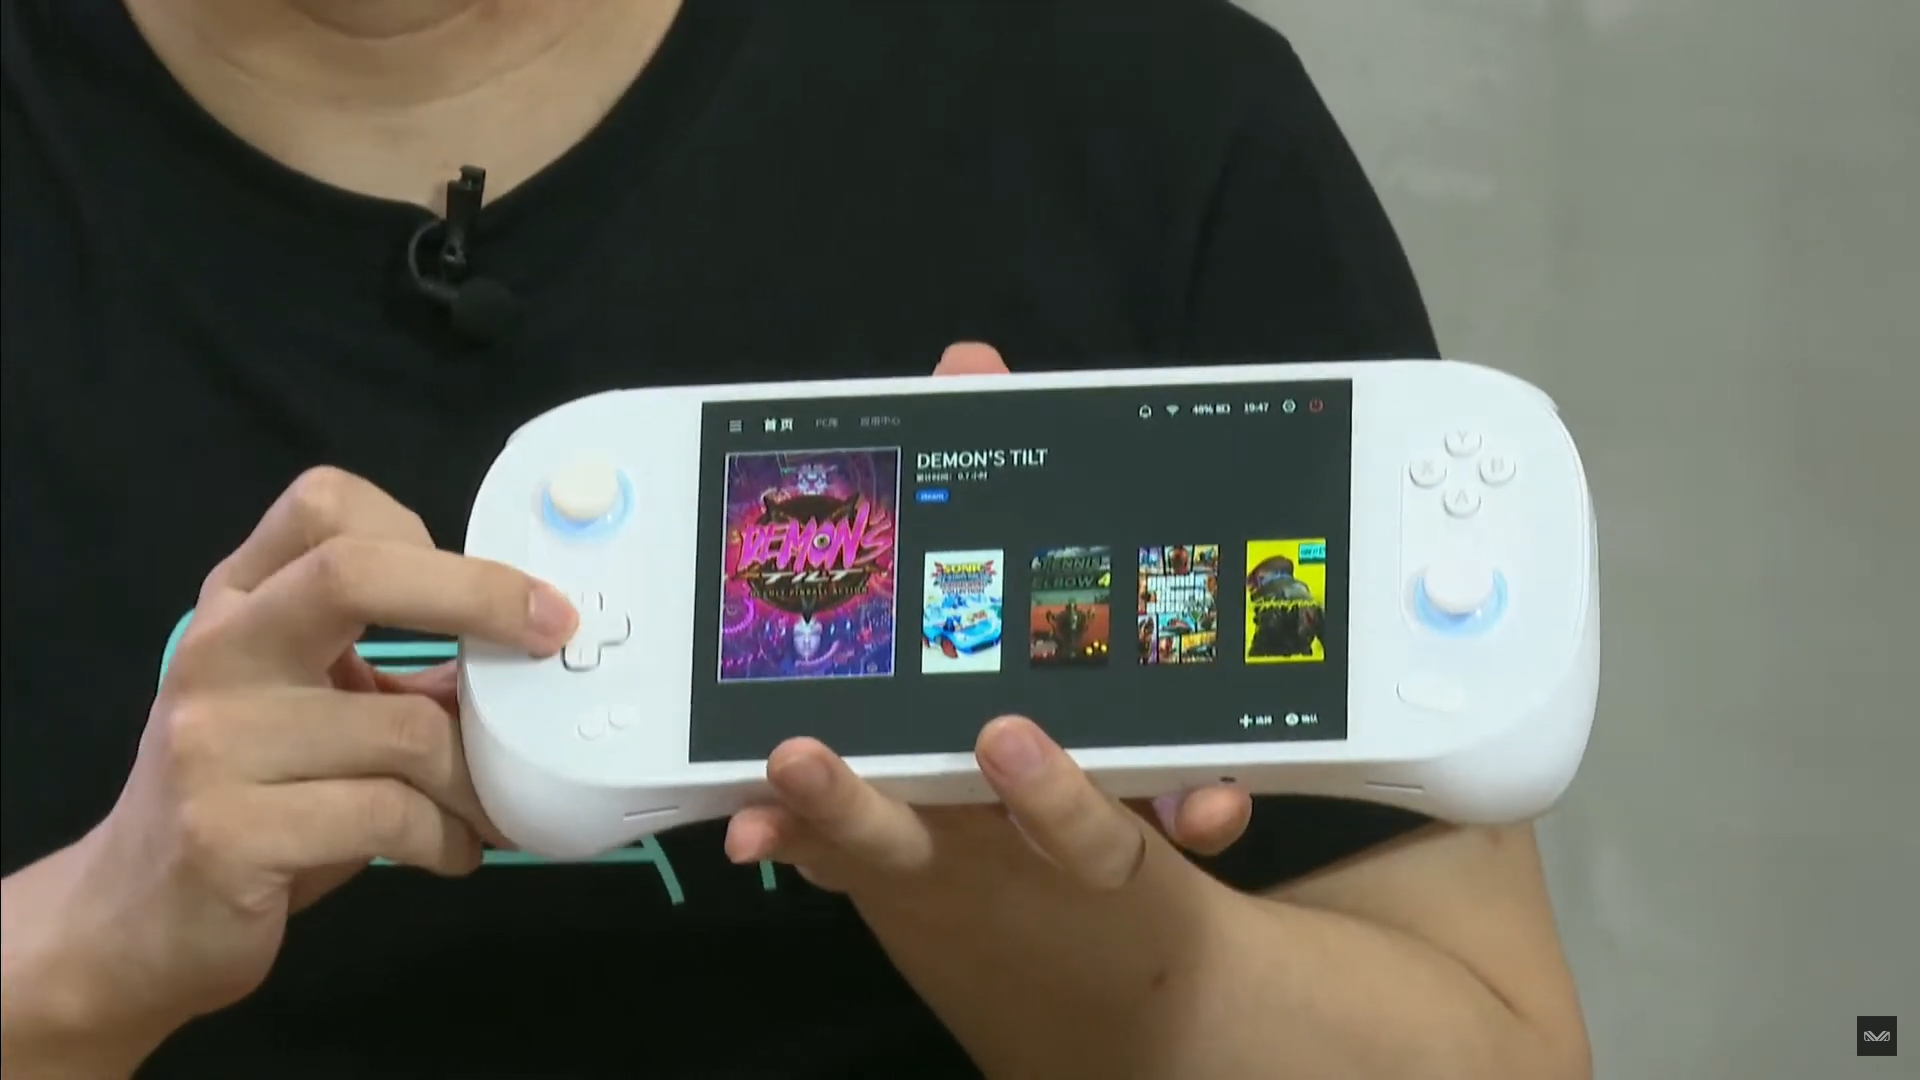 The Ayaneo 2S gaming handheld hits crowdfunding, but one factor could make it fail